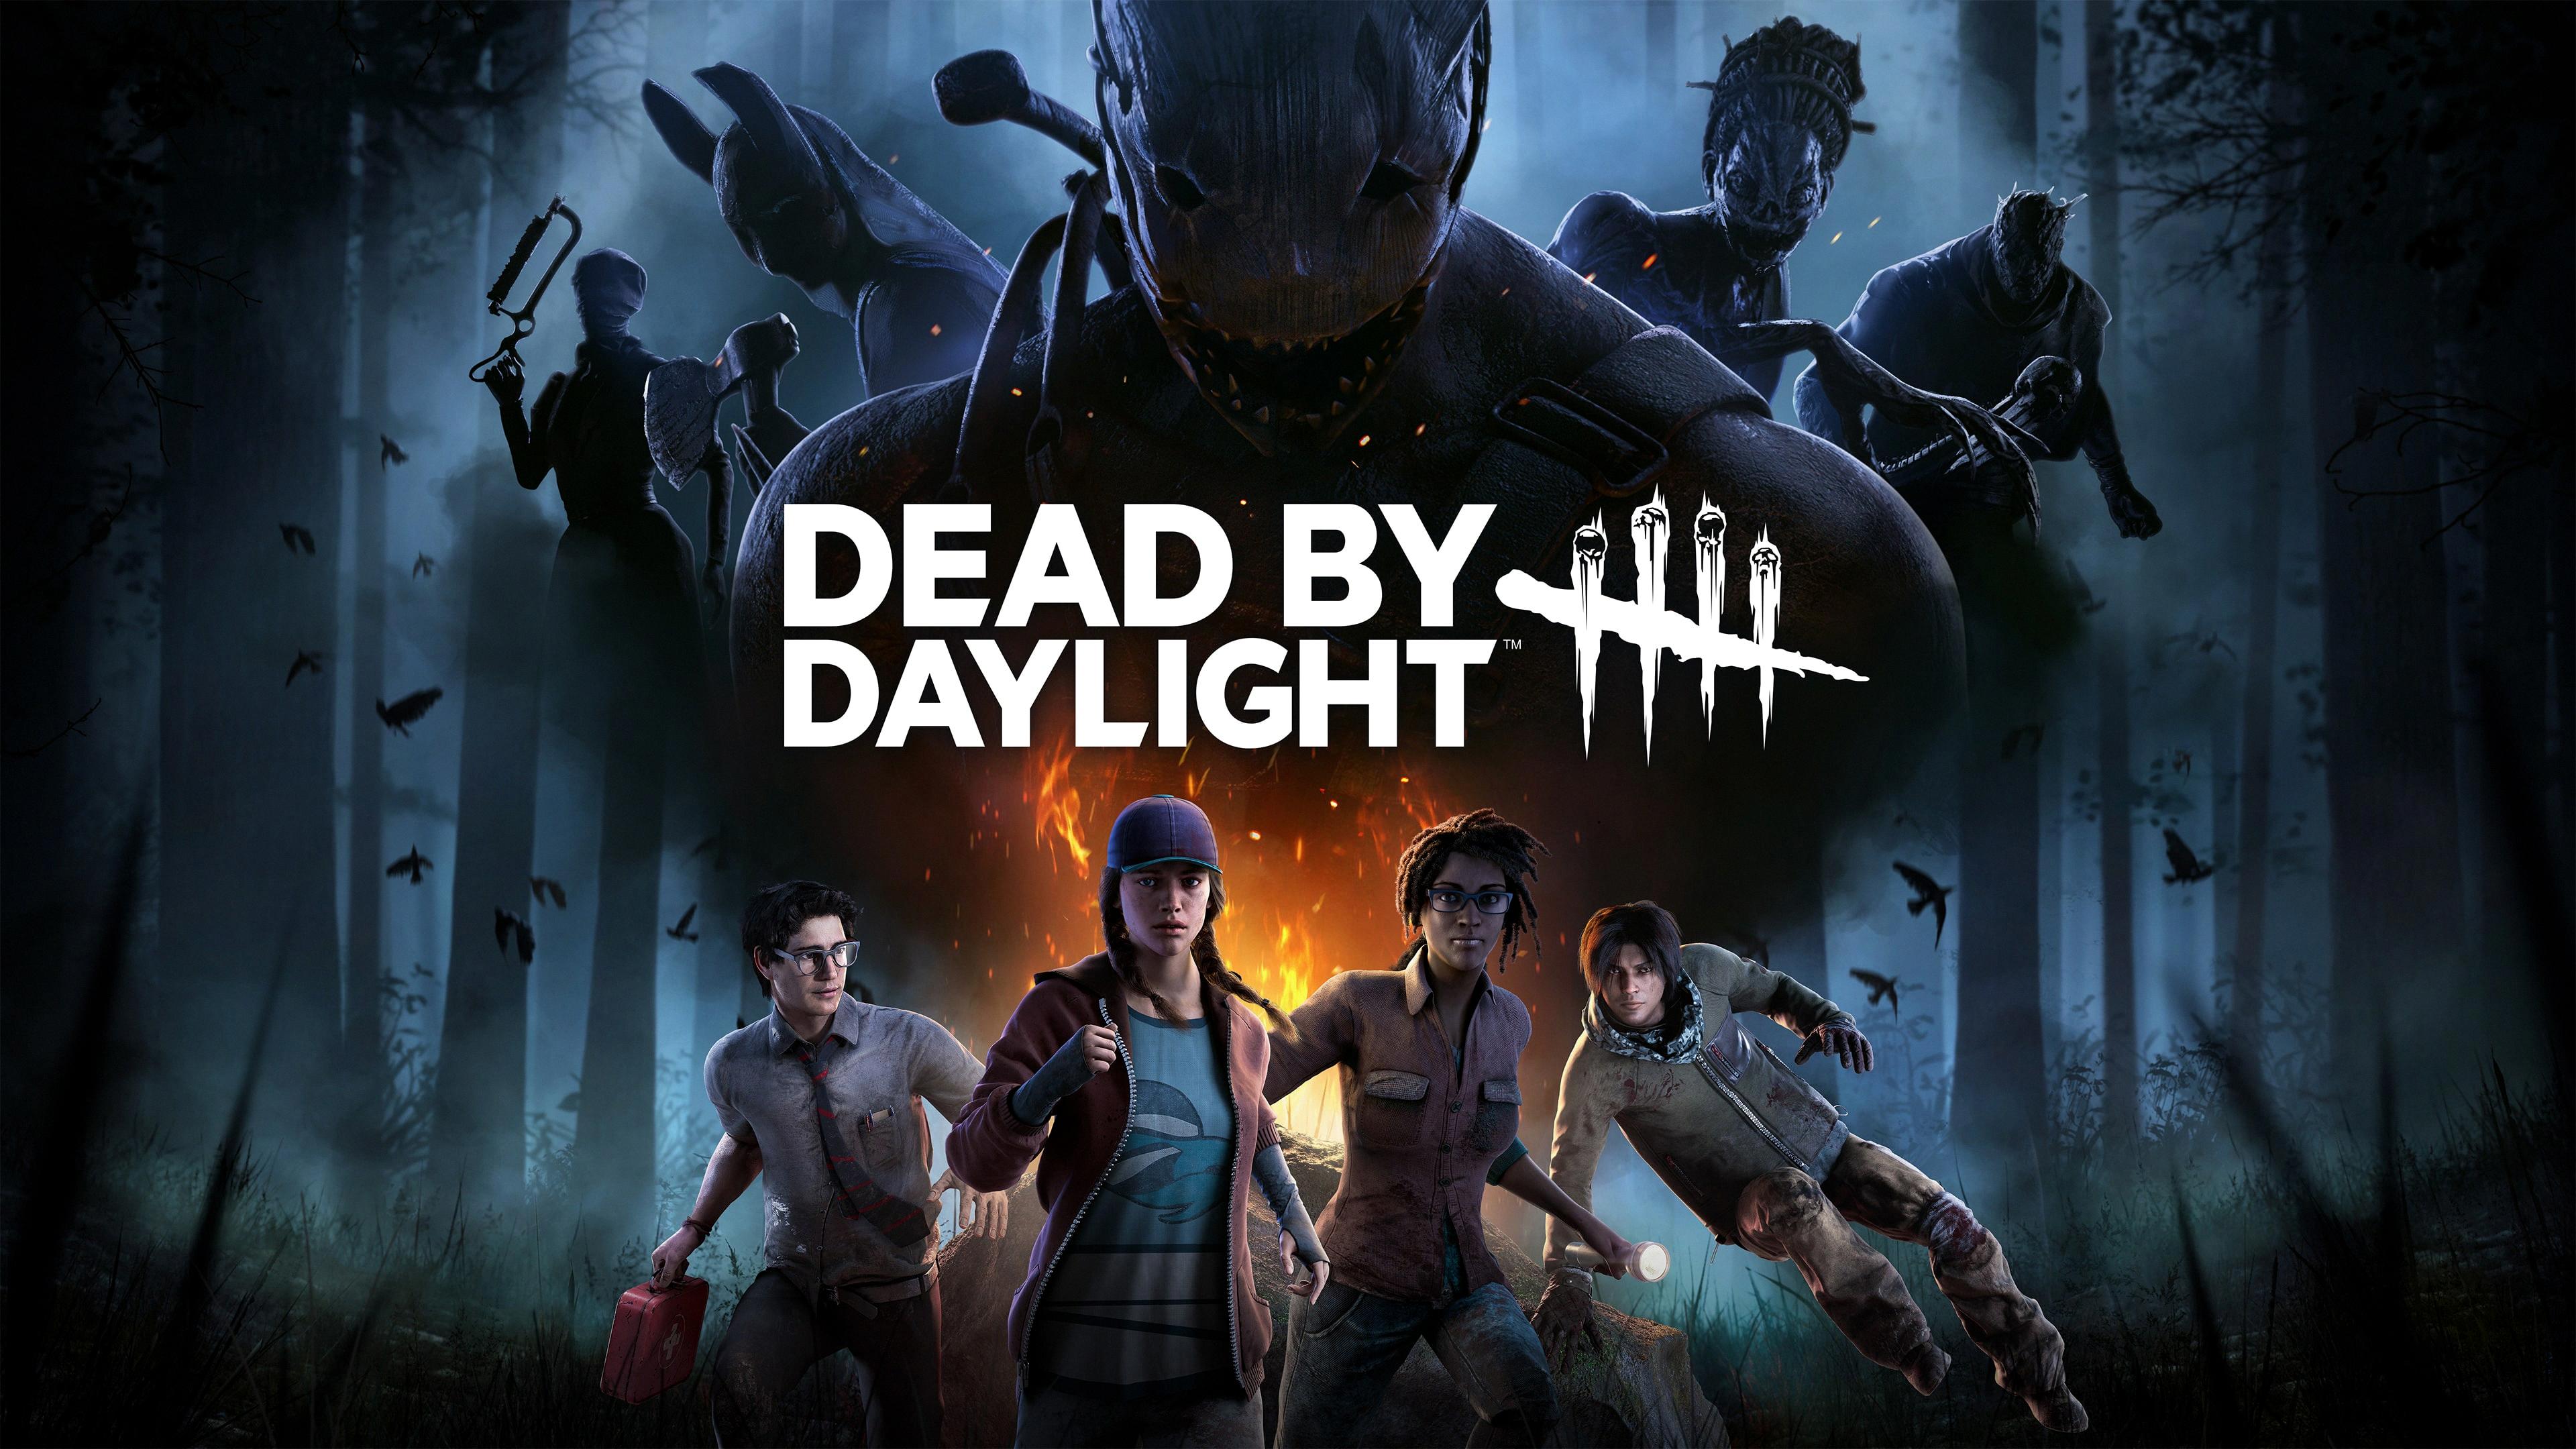 How To Find Matches Faster in Dead By Daylight? 9